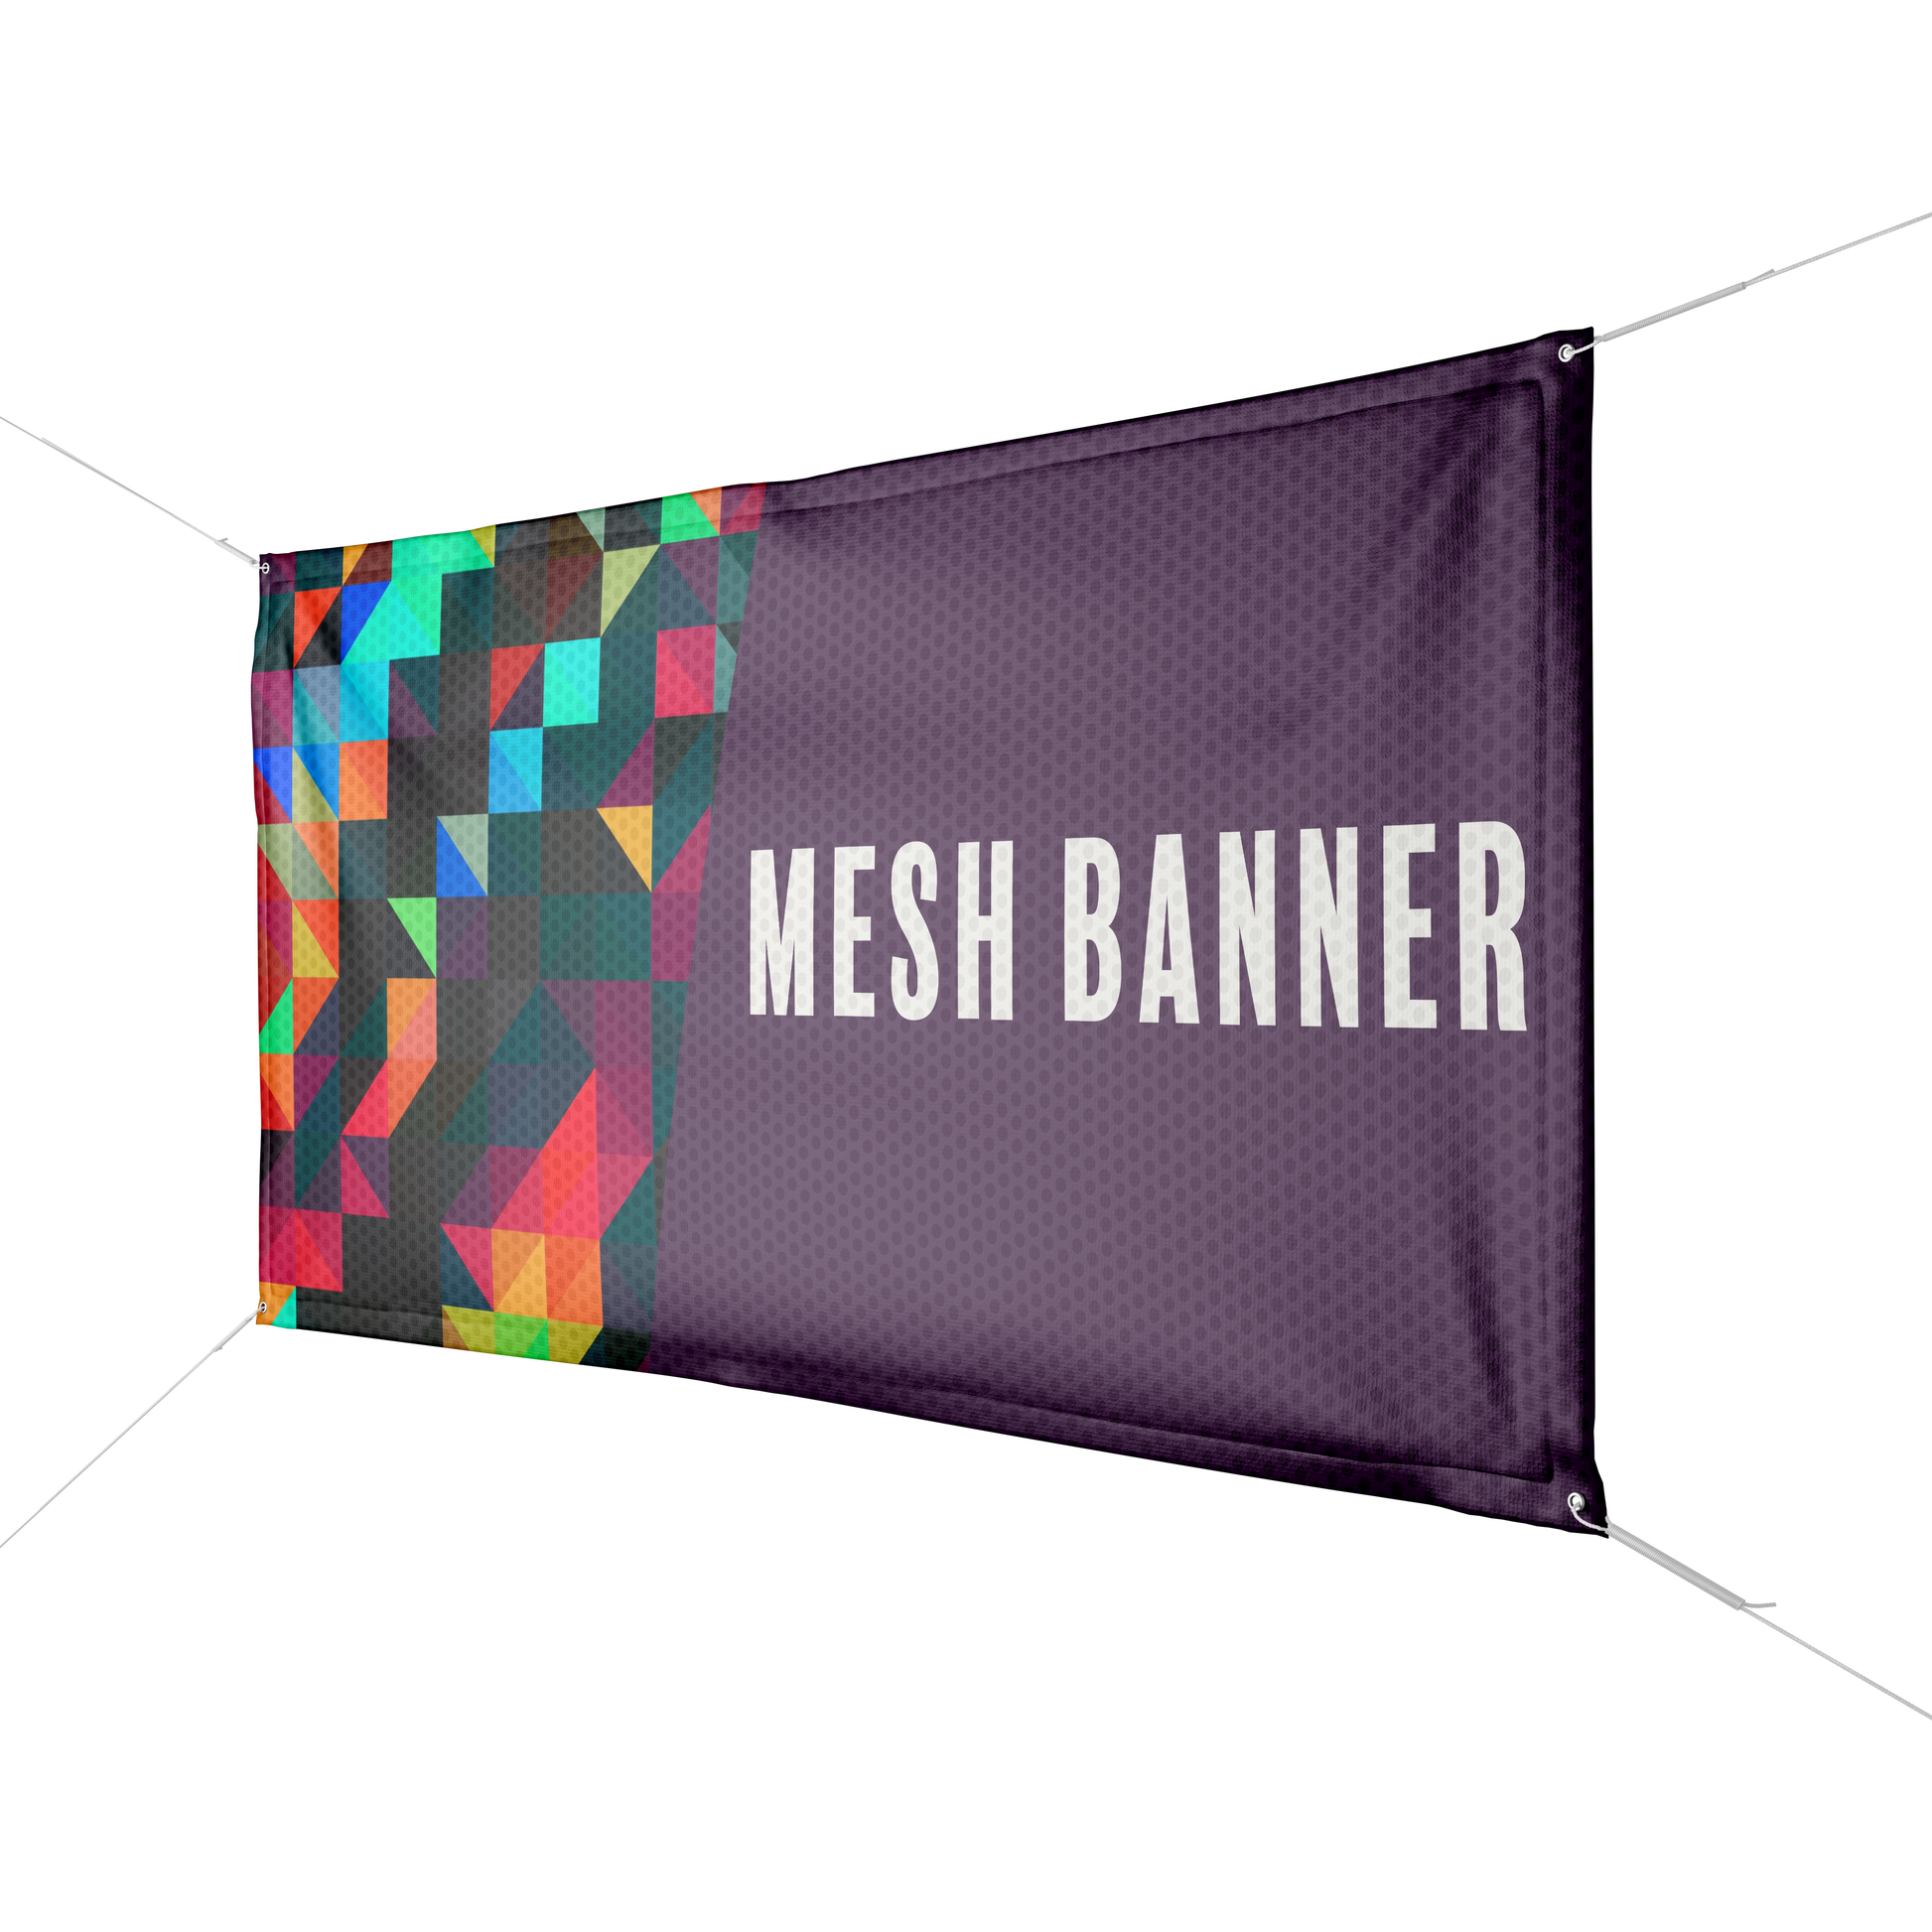 A colorful banner is displayed to show an example of a mesh banner.